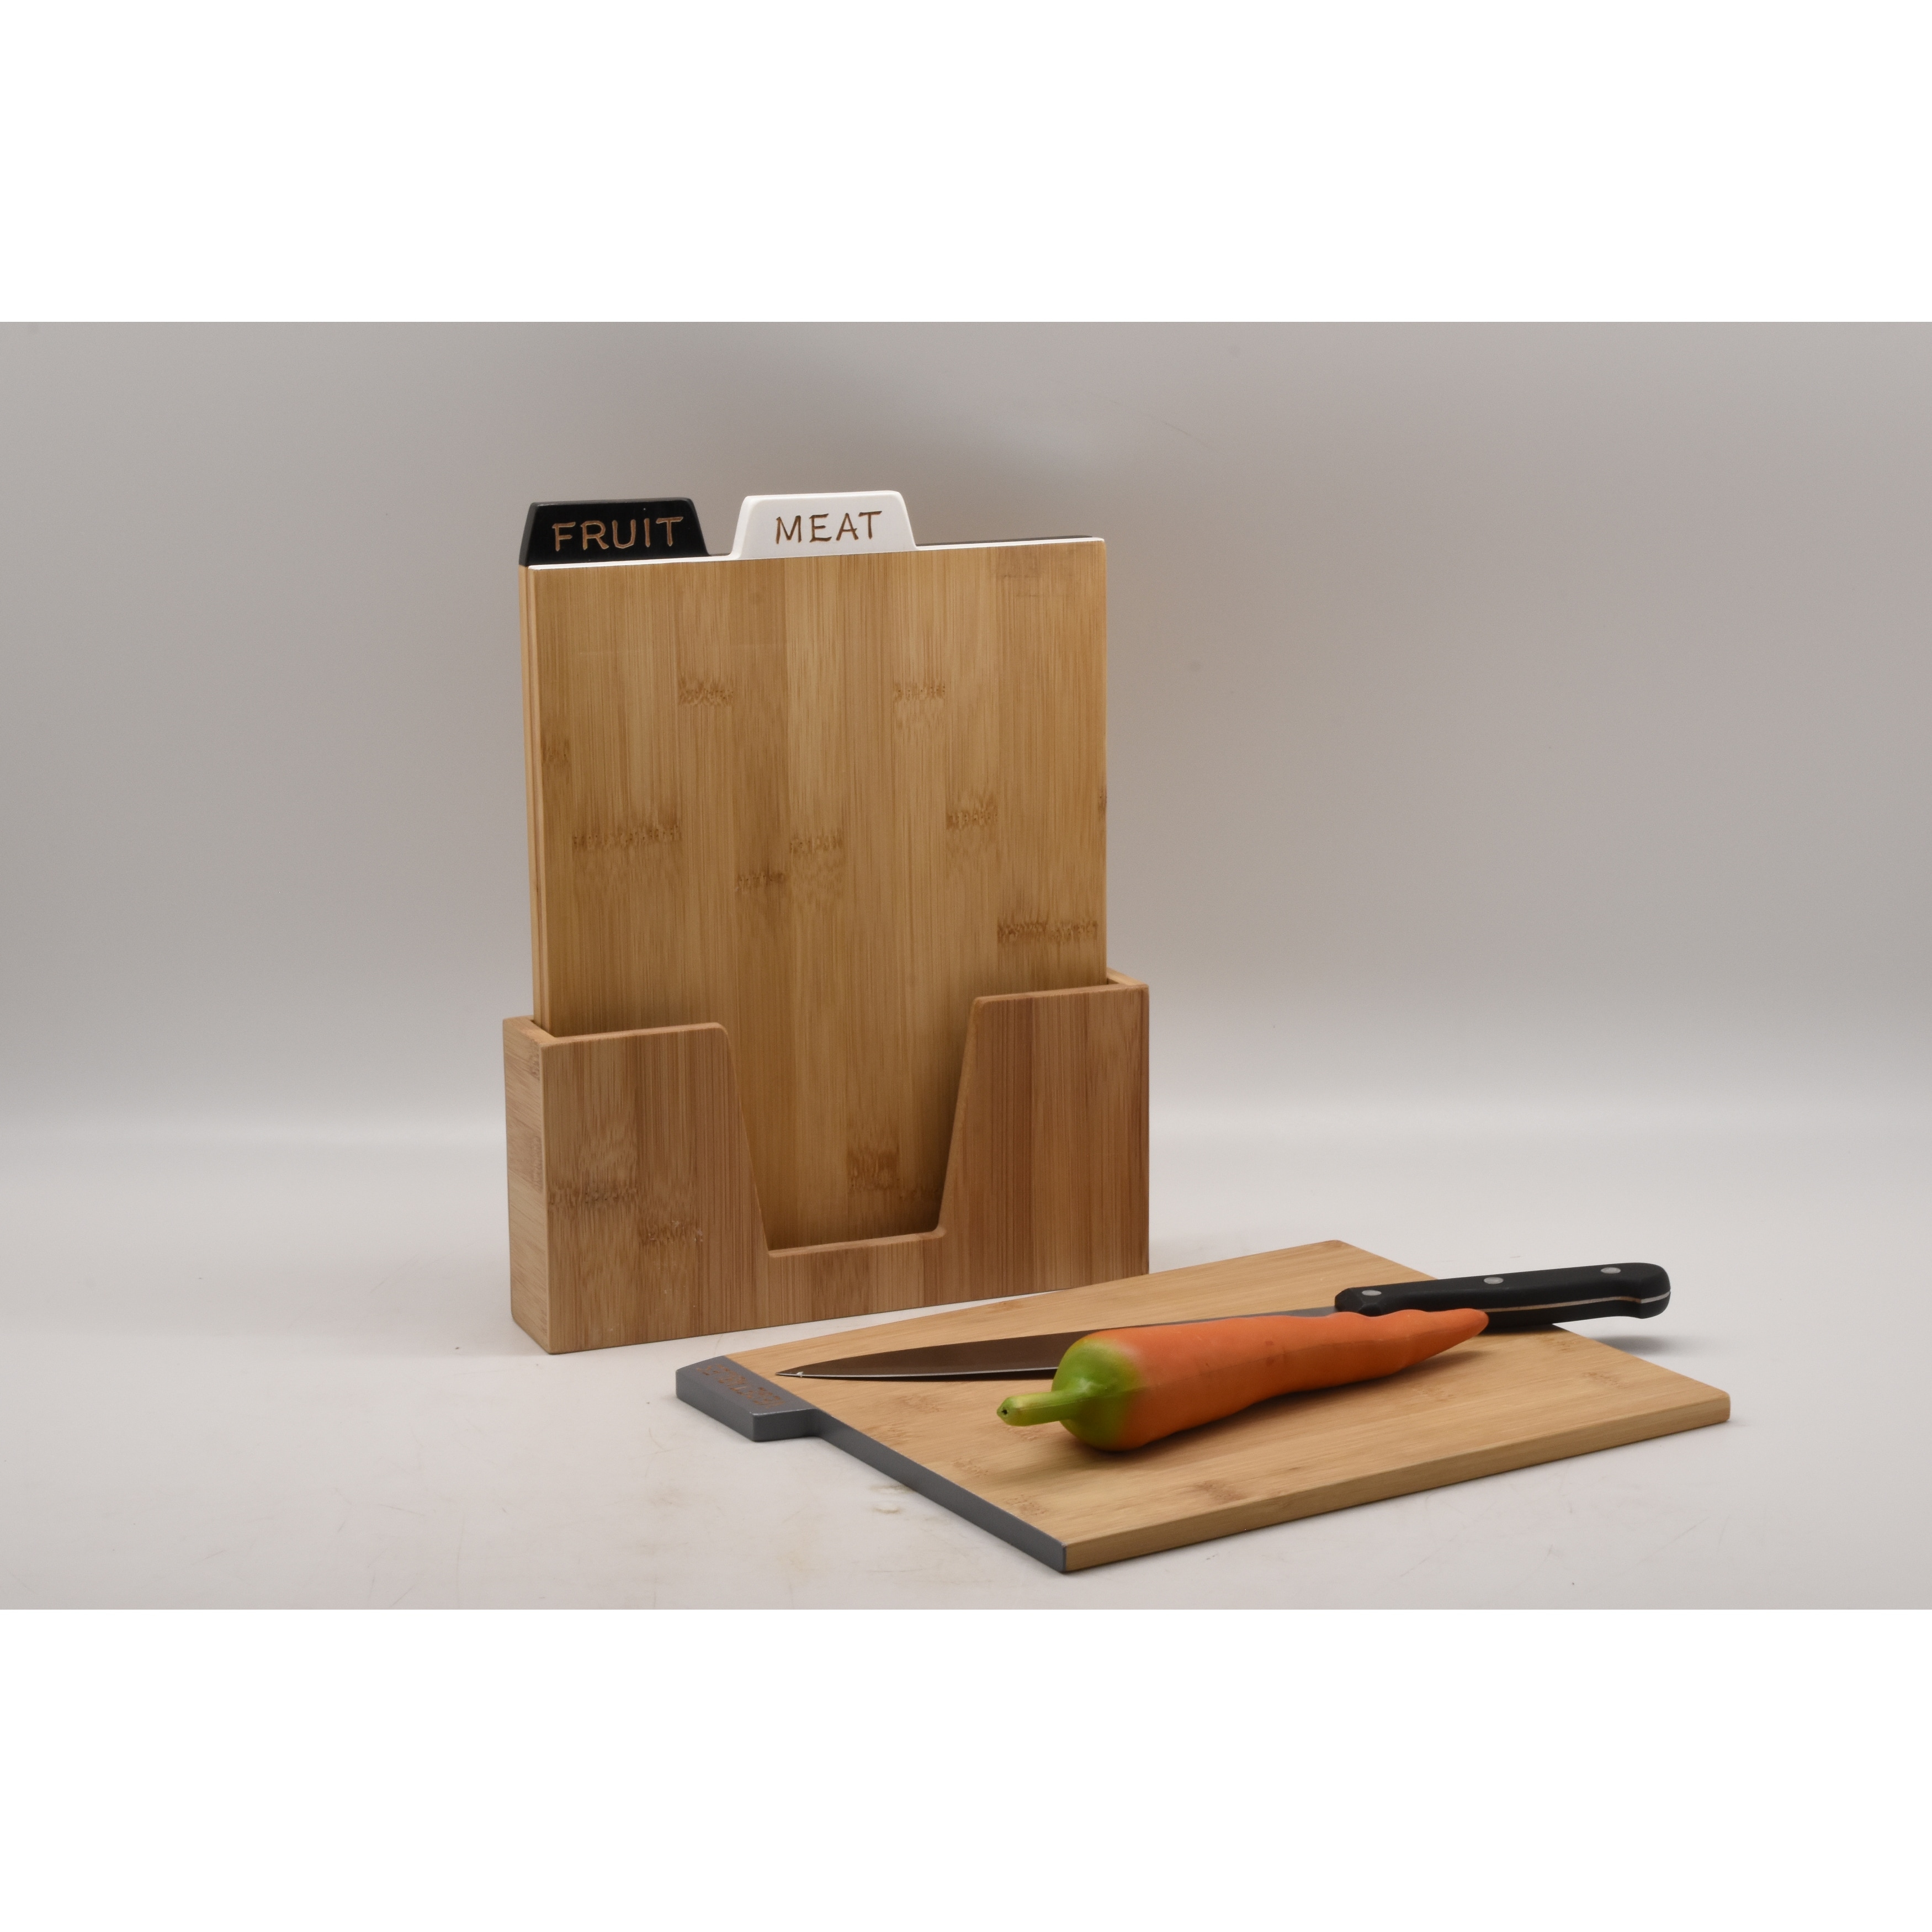 https://ak1.ostkcdn.com/images/products/is/images/direct/32994a52a73cafa40681318955d24f99ef32263c/Set-of-3-BAMBOO-CUTTING-BOARD-with-index-style-tab-design-23.7*4.7*30CM.jpg